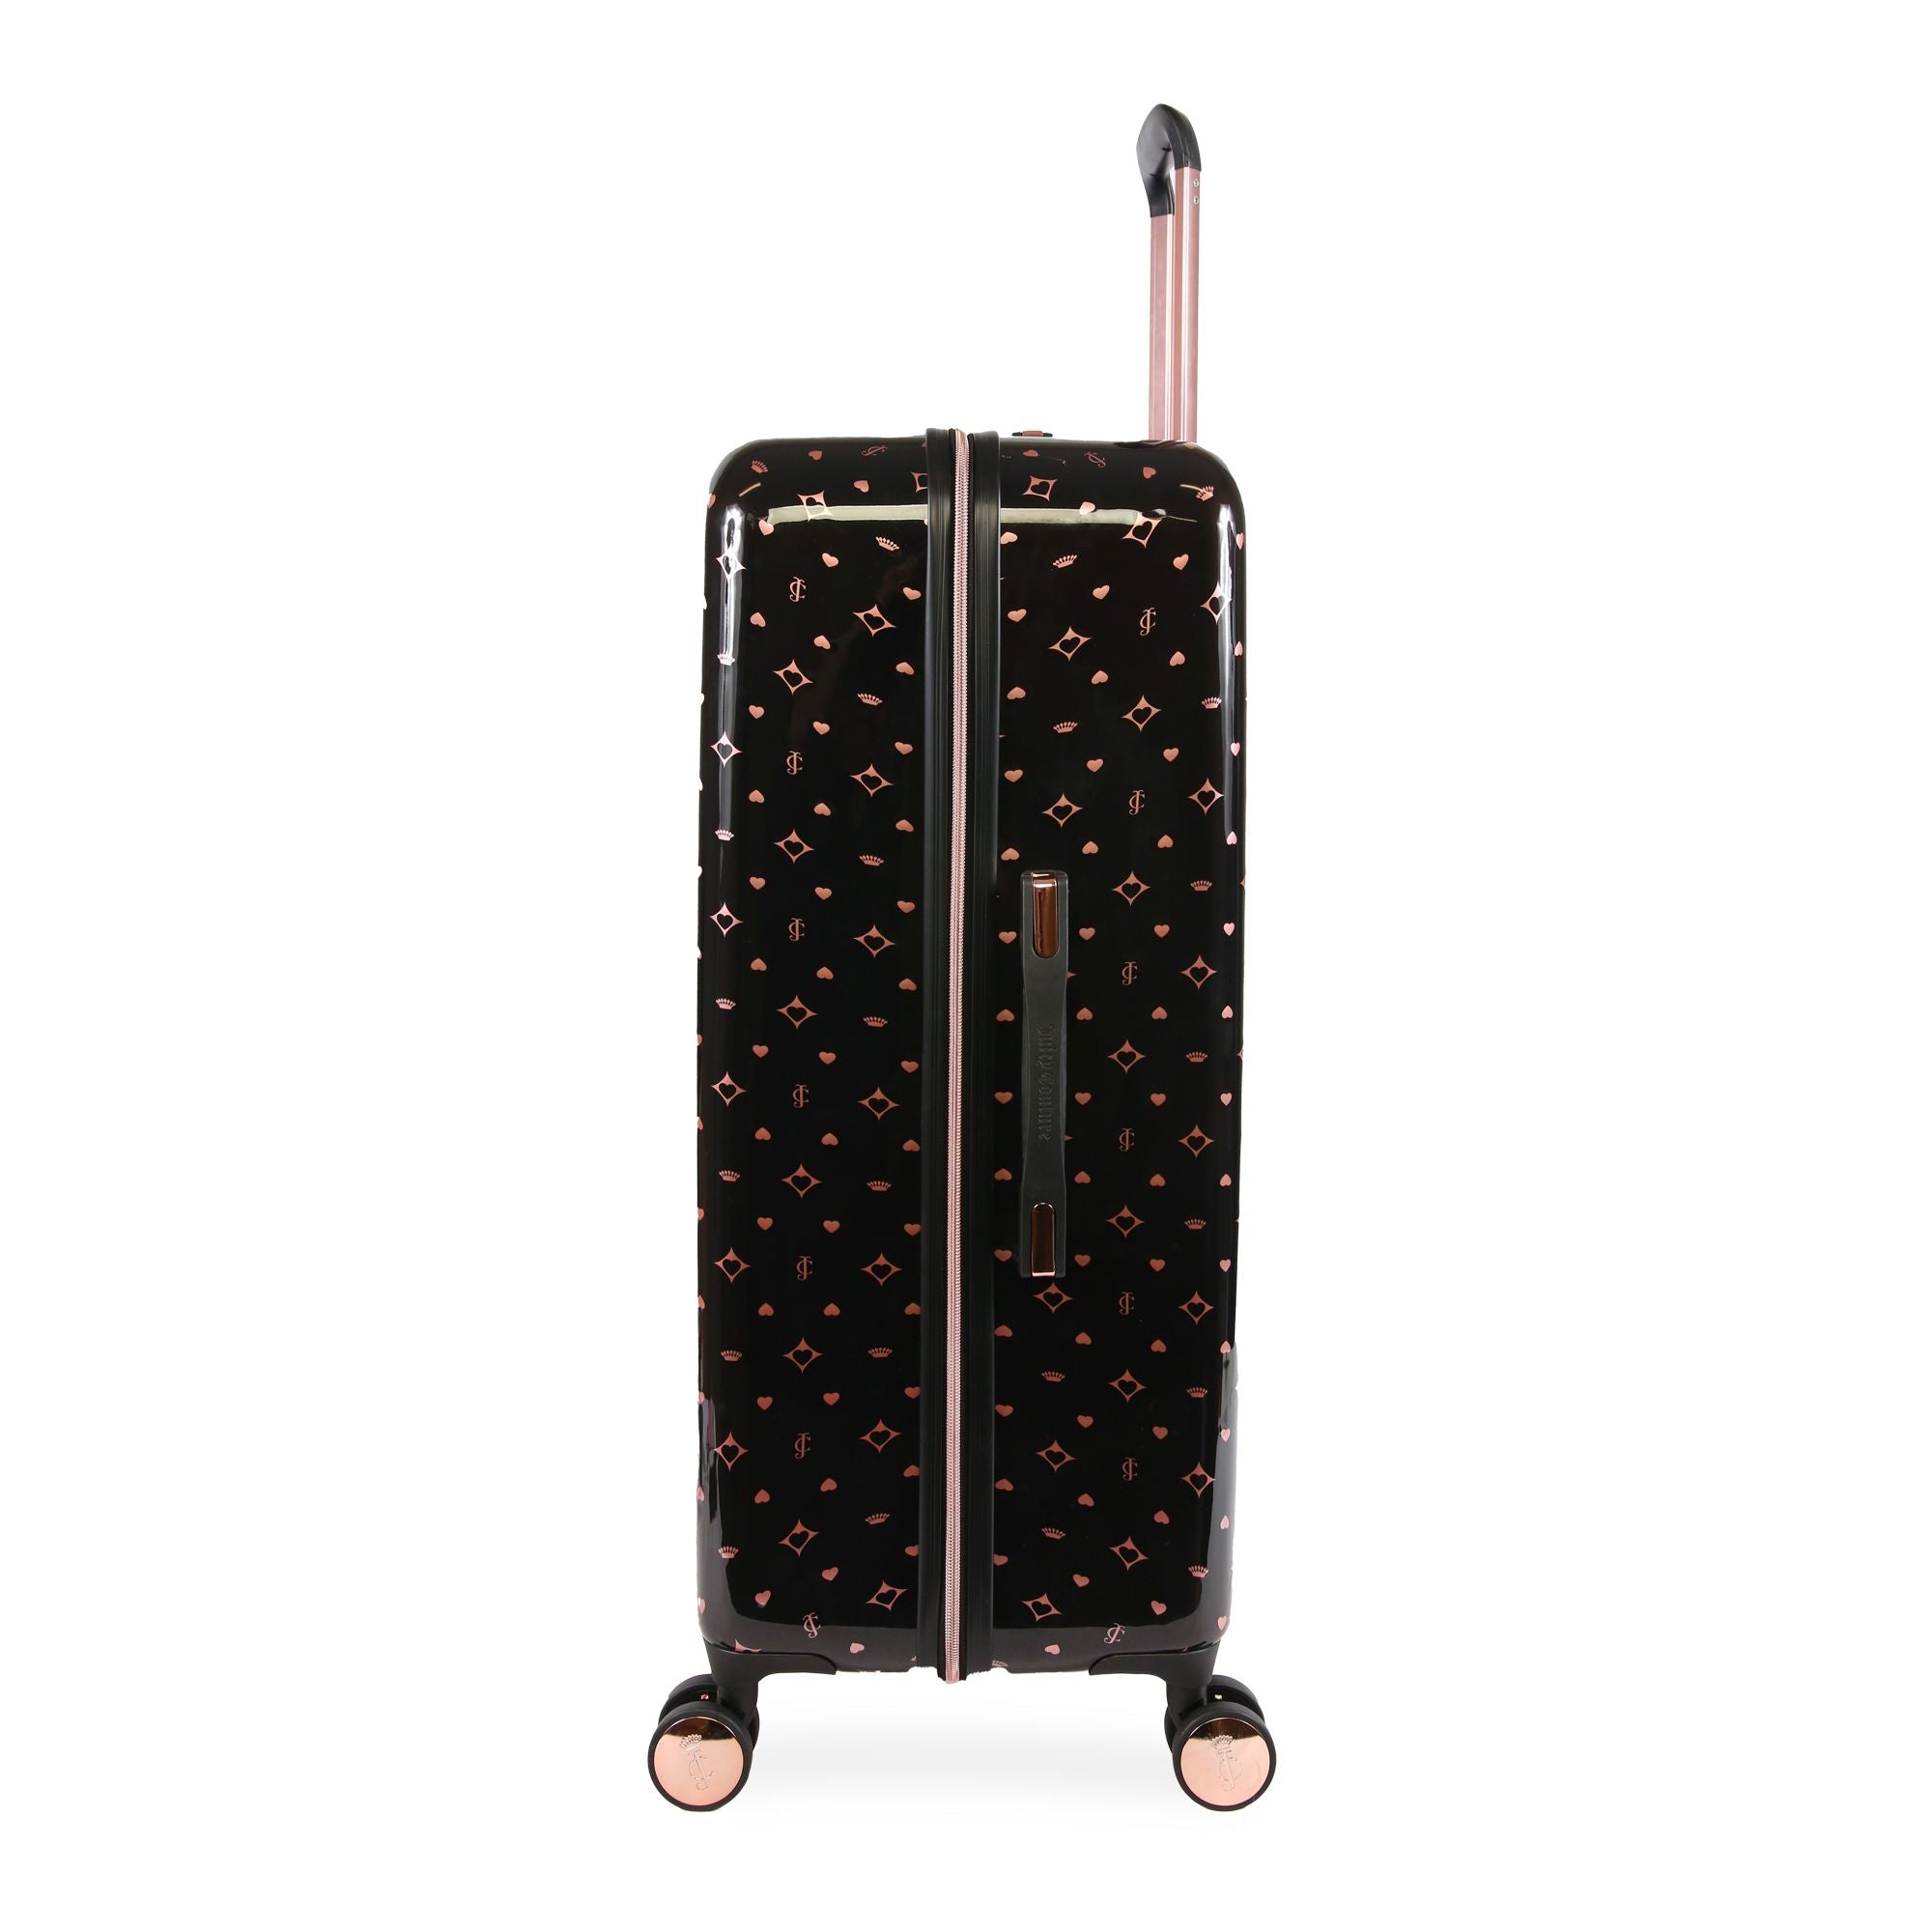 2-Piece Hardside Spinner Luggage Set - Juicy Couture